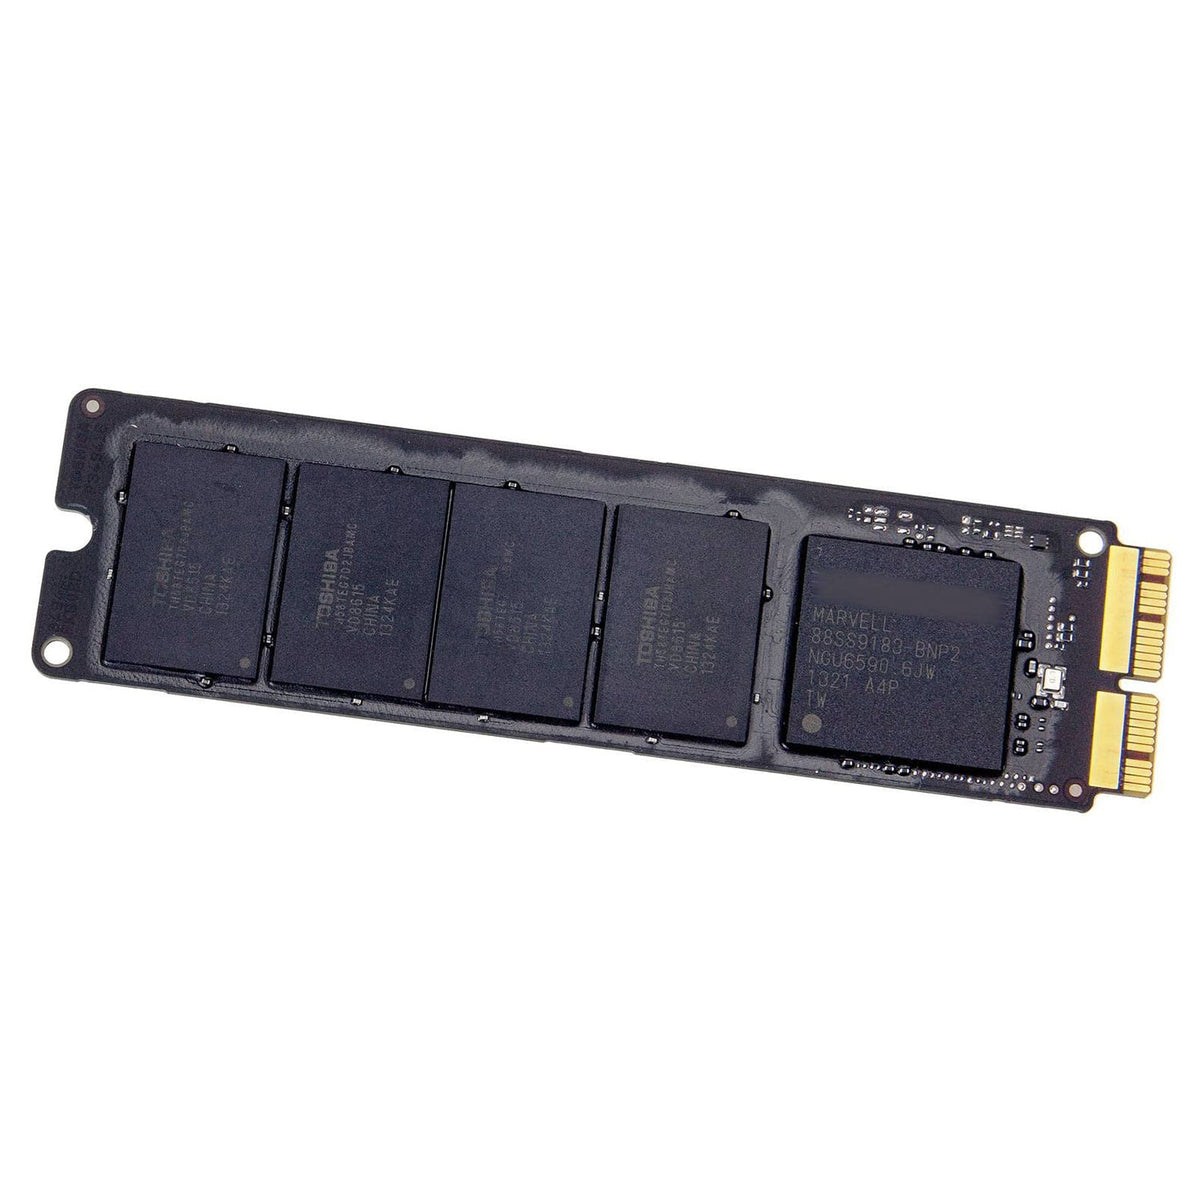 SOLID STATE DRIVE (SSD) FOR IMAC A1418/A1419 (LATE 2013, LATE 2014)